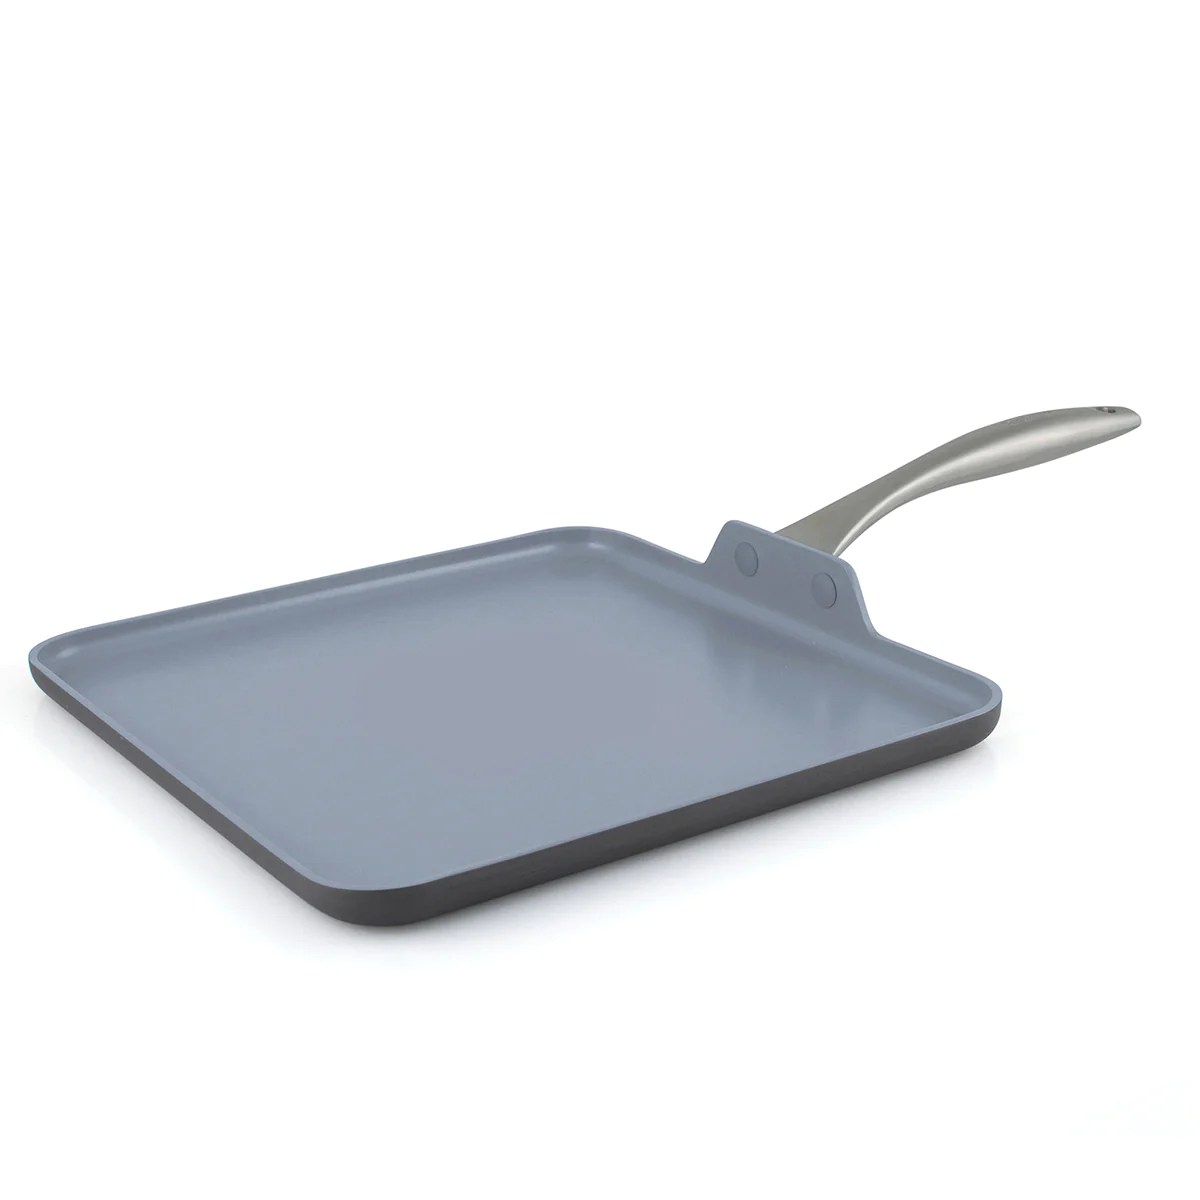 An aluminum square flat griddle pan from GreenPan